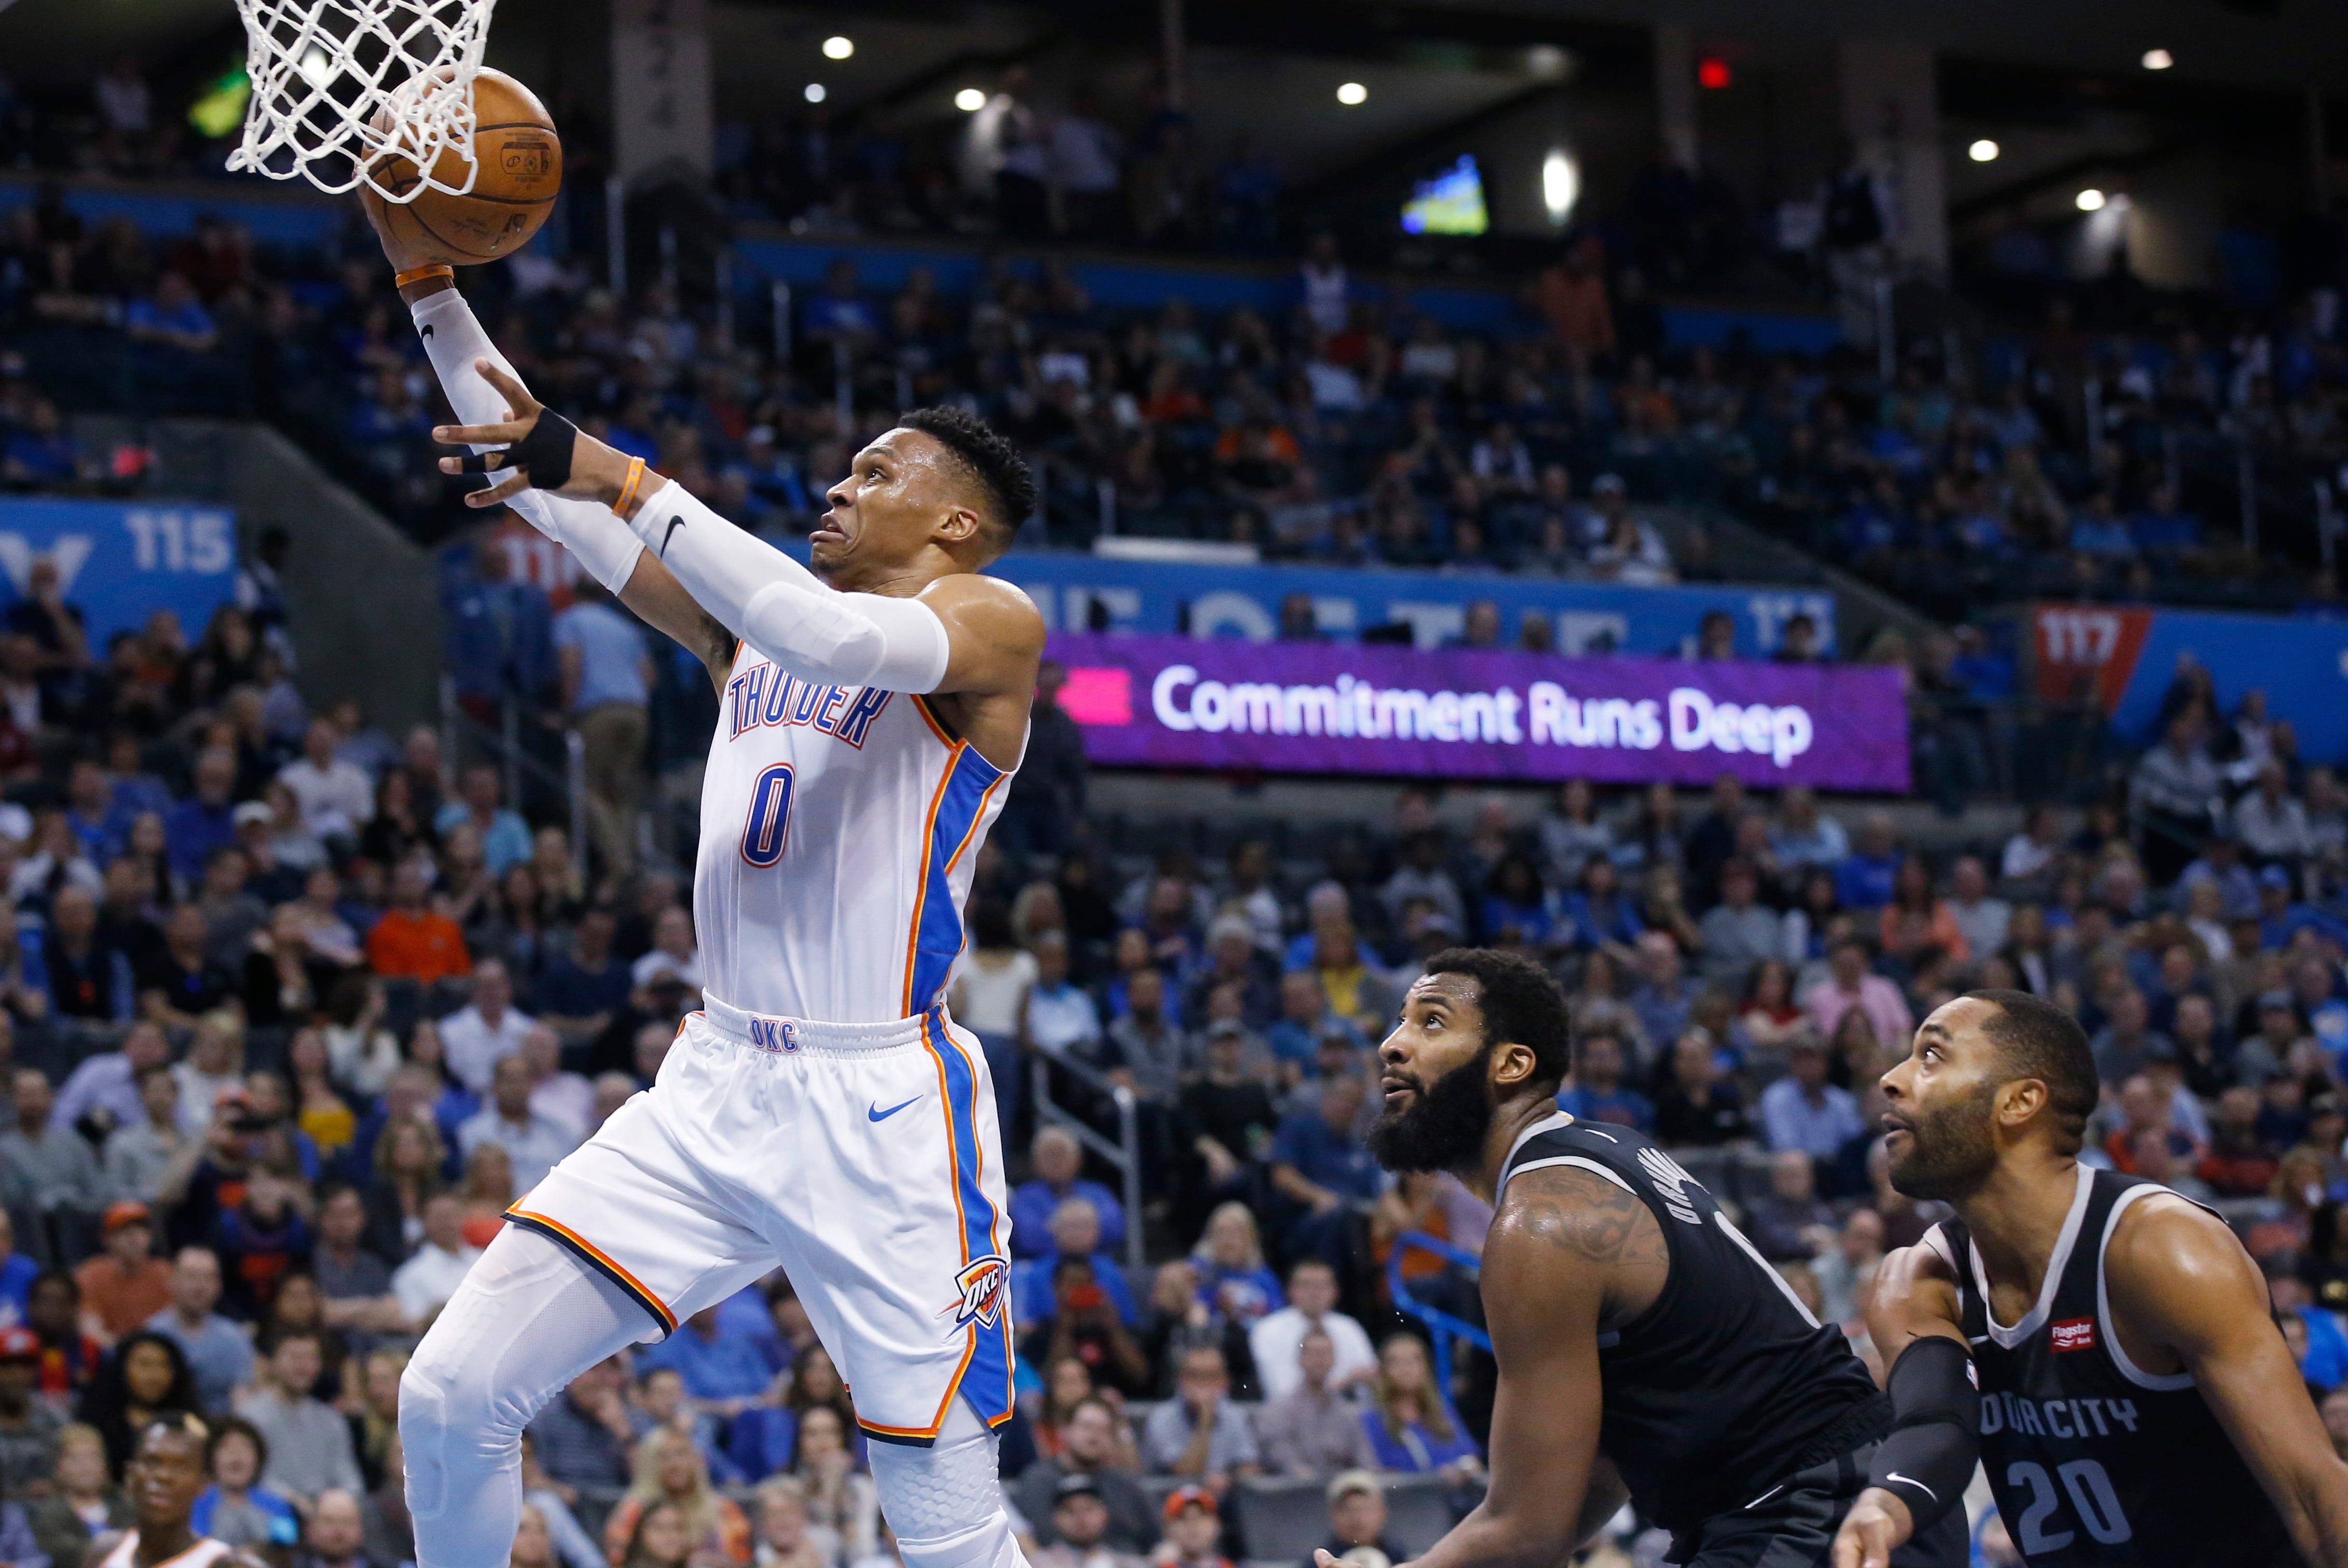 Oklahoma City Thunder guard Russell Westbrook (0) goes to the basket in front of Detroit Pistons center Andre Drummond, center, and guard Wayne Ellington (20) during the second half.